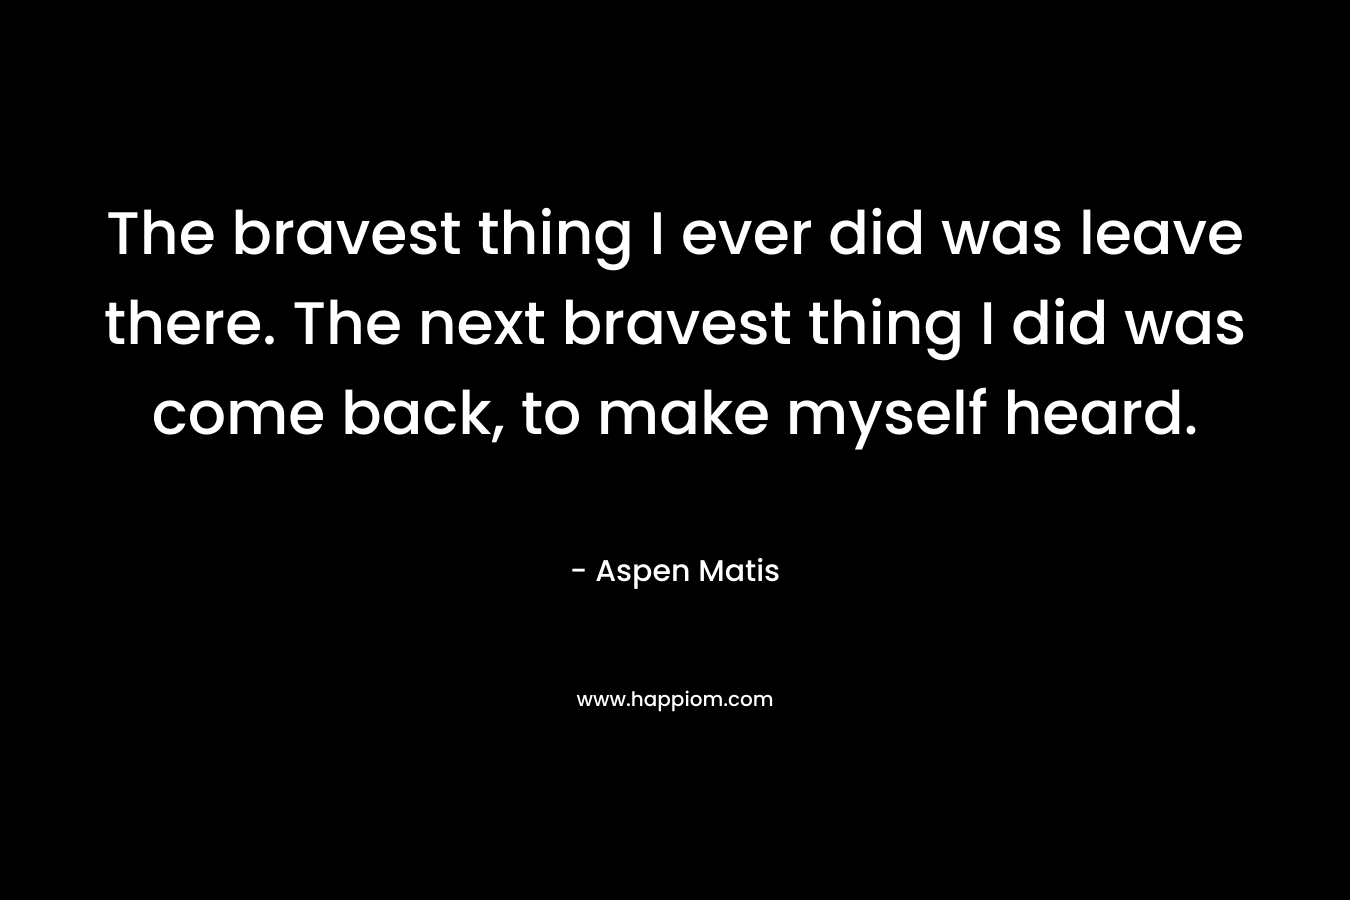 The bravest thing I ever did was leave there. The next bravest thing I did was come back, to make myself heard.